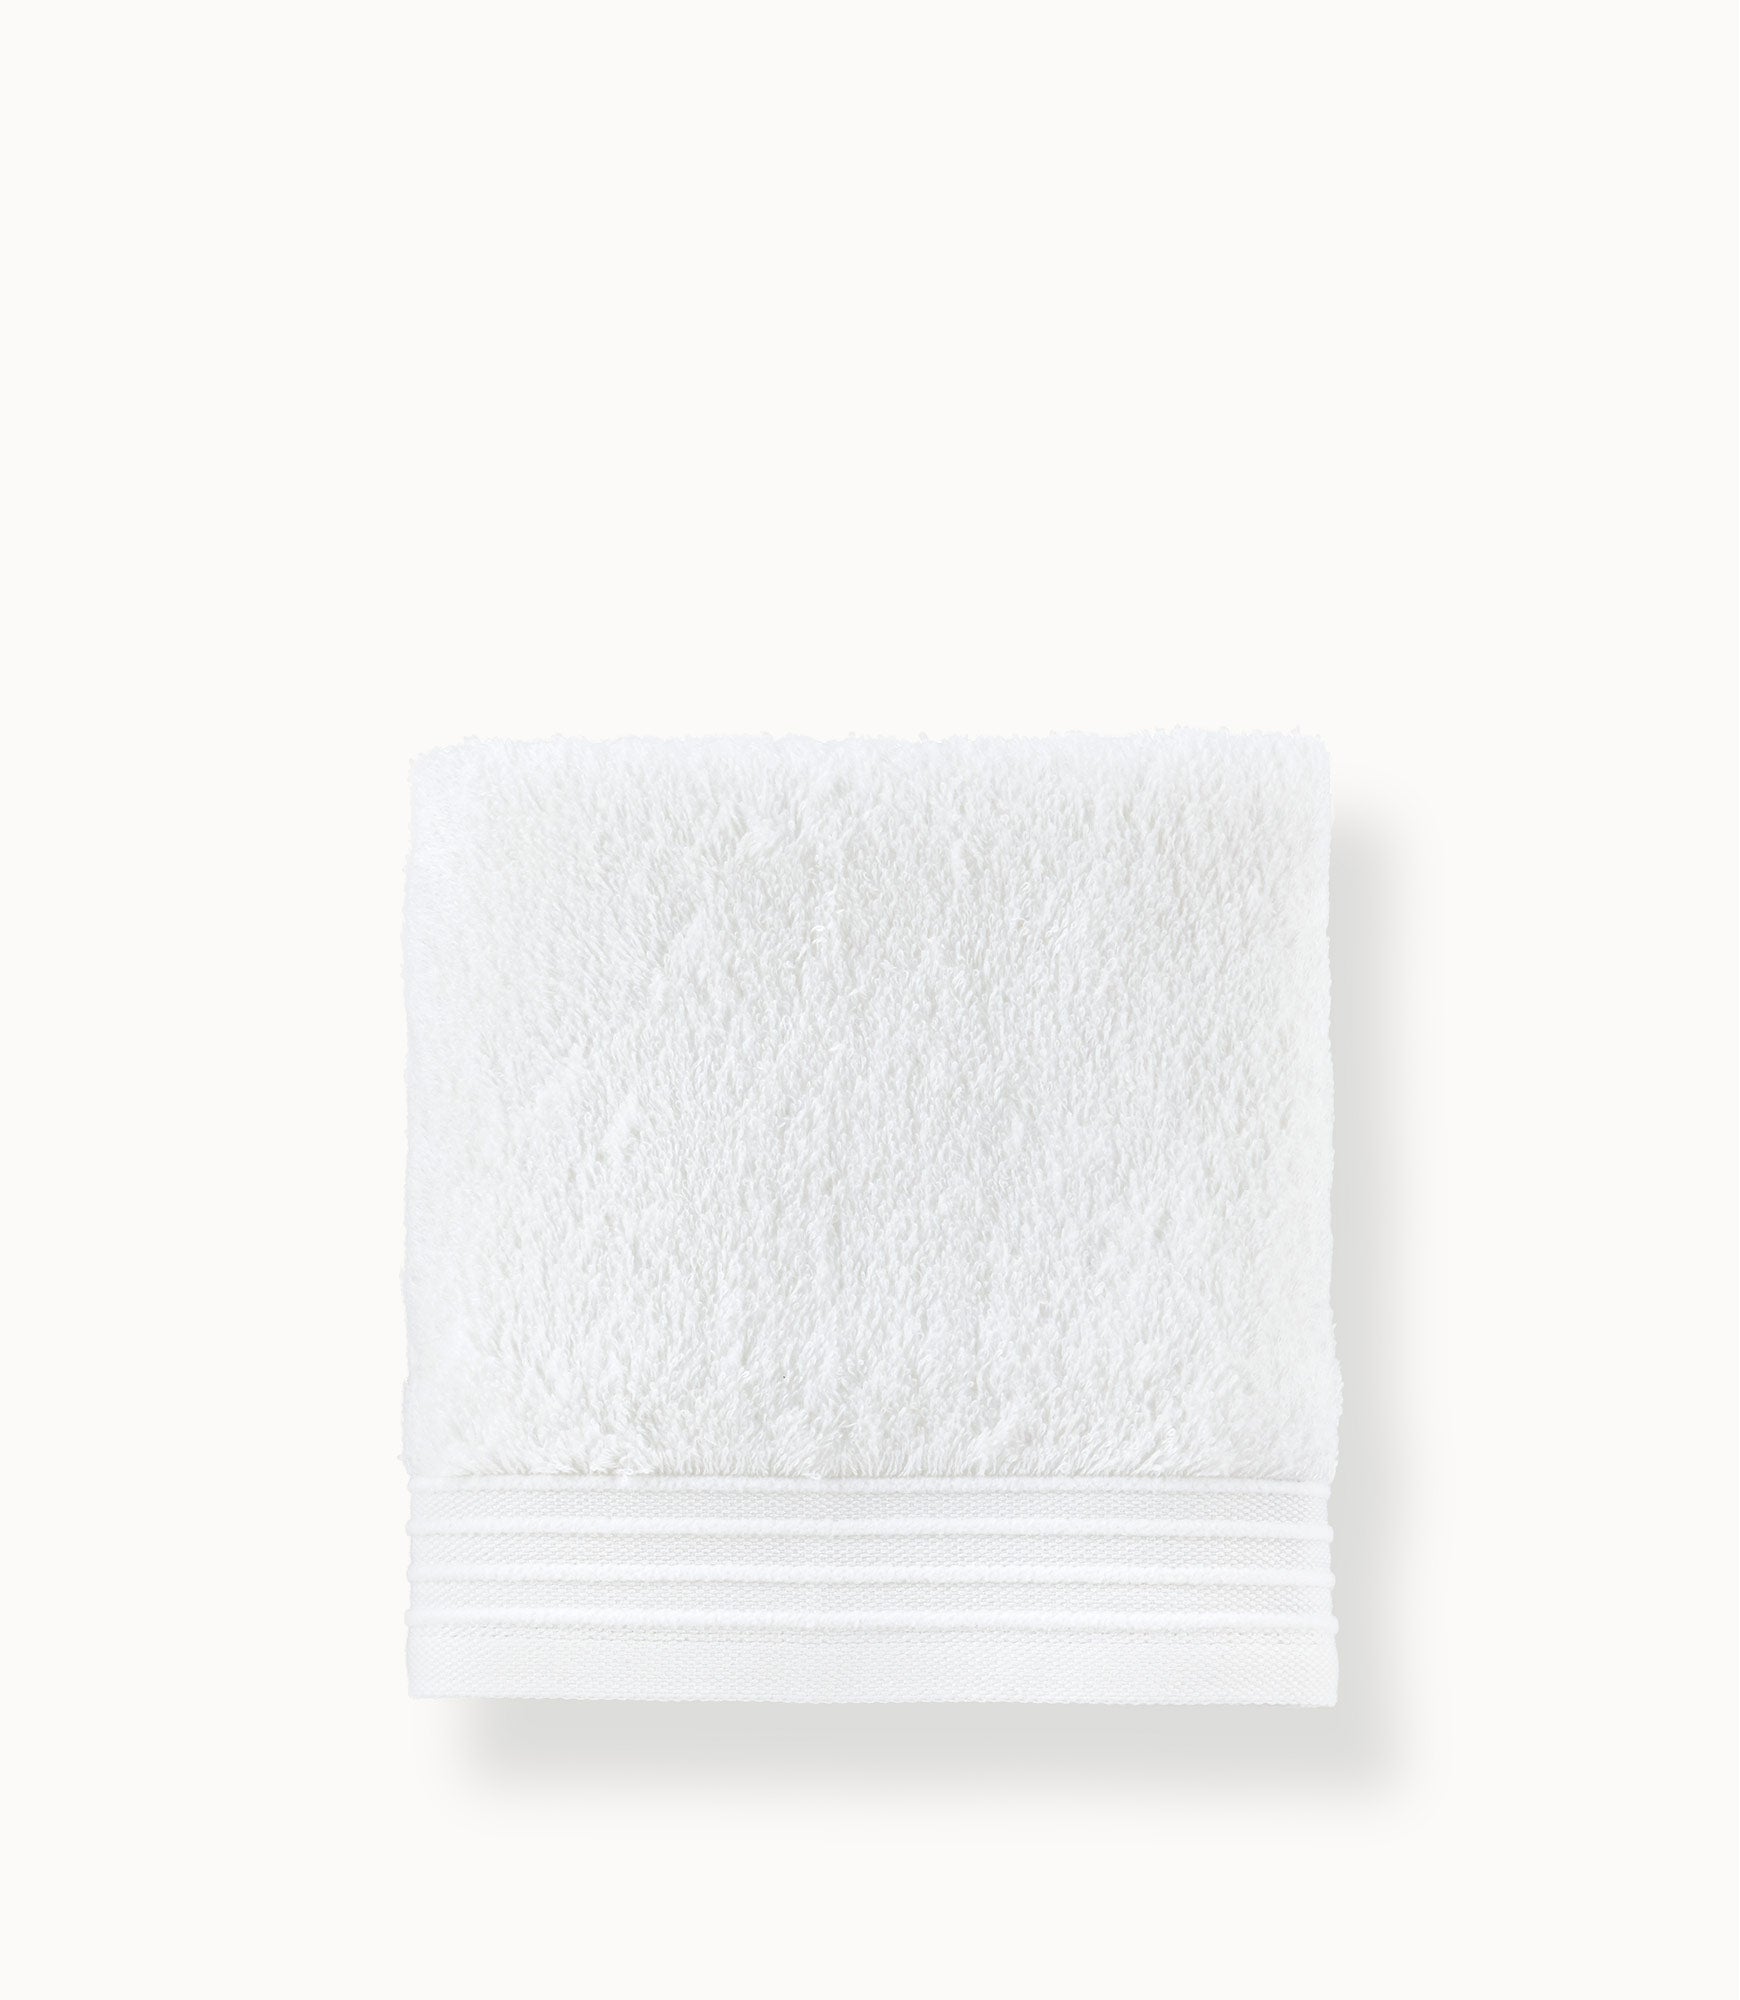 Spring Bliss Egyptian Cotton Towels